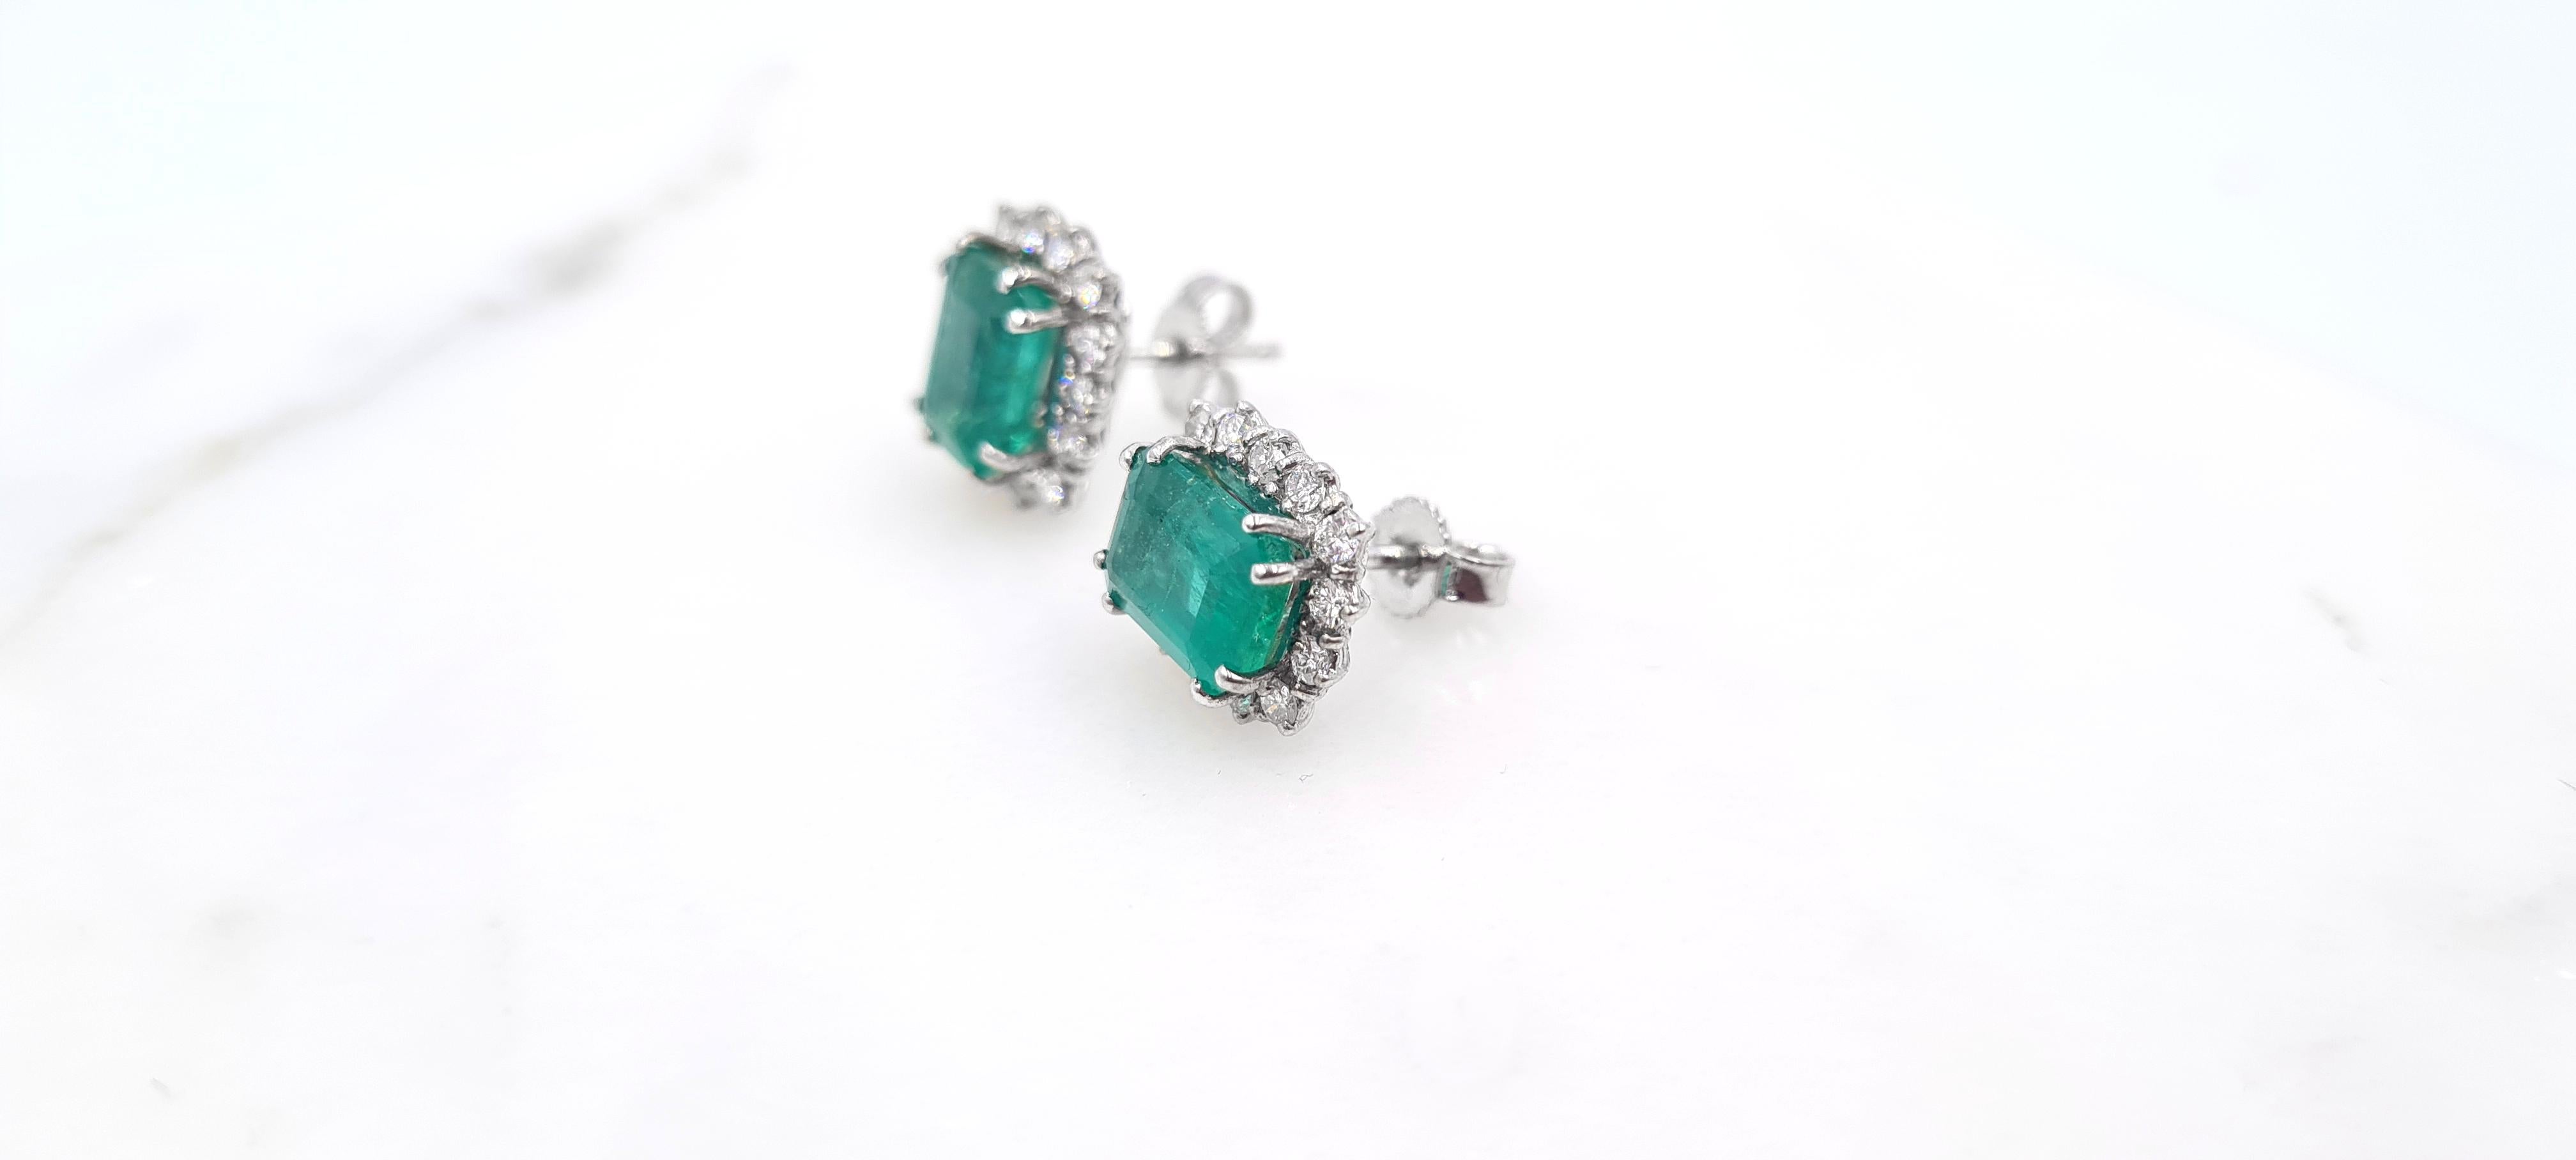 Fantastic IGI Certified 3.98 Ct Emerald Cut Emerald Earrings.
The emeralds weigh 1.84 Carats and 2.04 Carats respectively and are
surrounded by 0.60 Carat of round brilliant diamonds in G quality for 
color and VS for clarity.